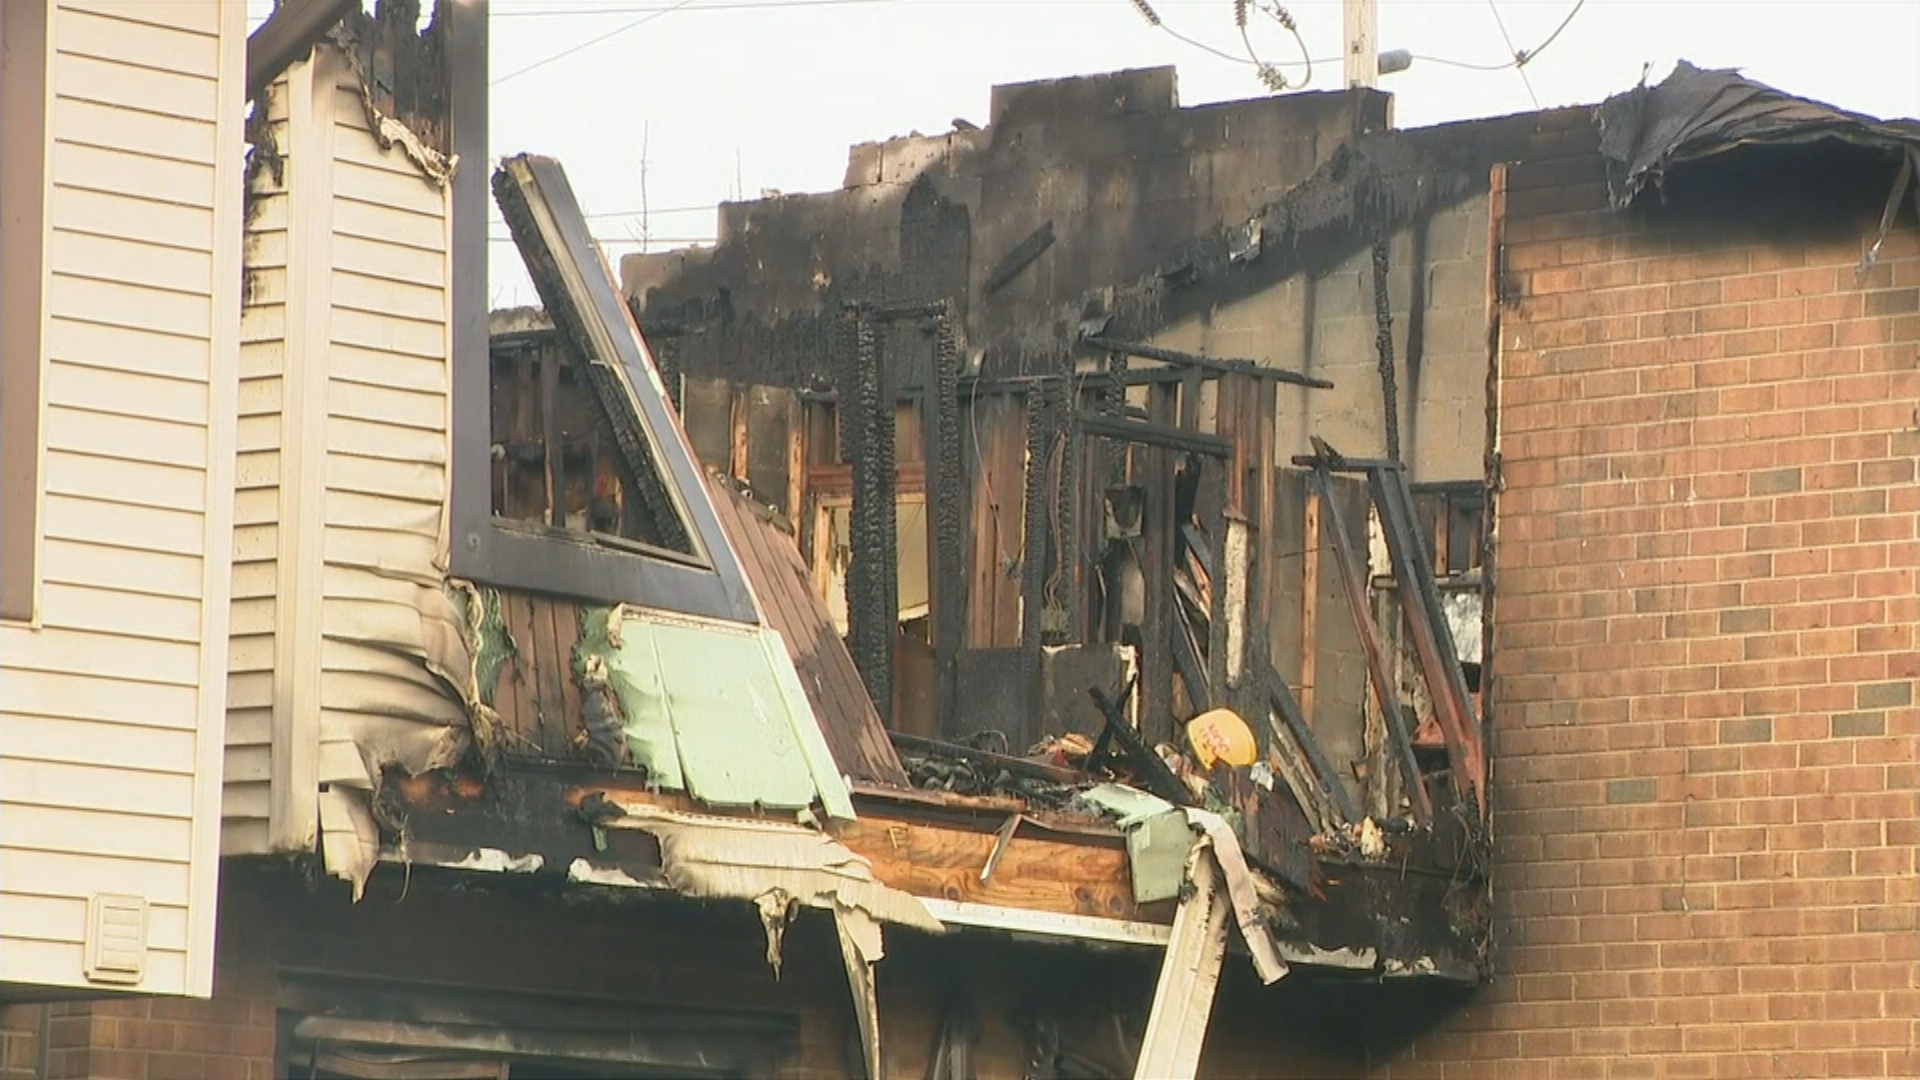 Officials Investigating Deadly Fire In Wilmington, Delaware